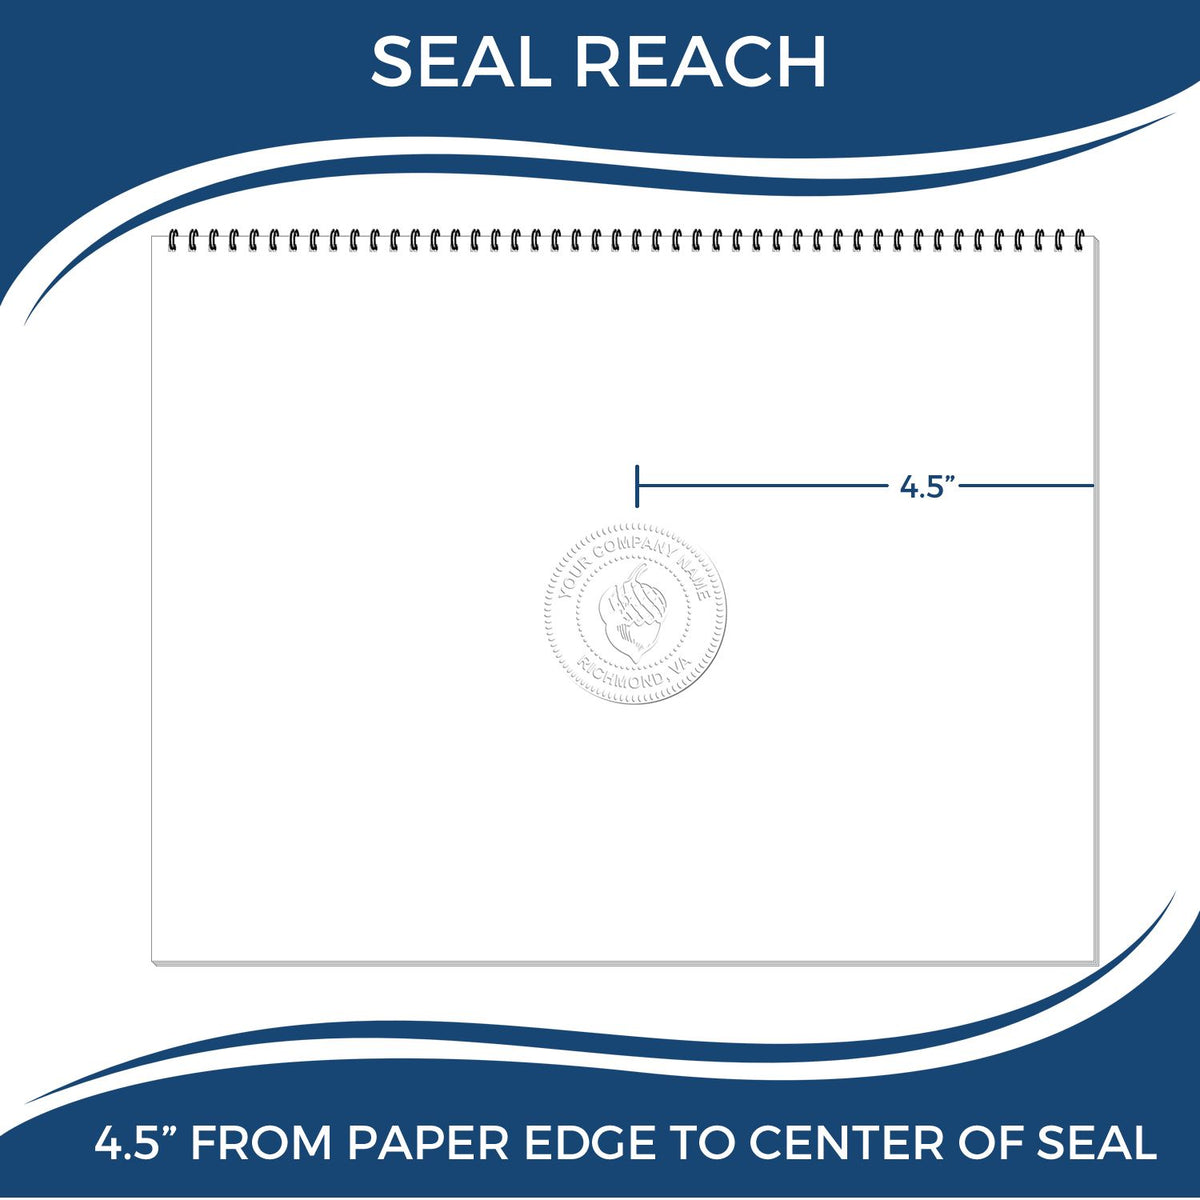 An infographic showing the seal reach which is represented by a ruler and a miniature seal image of the Extended Long Reach Georgia Surveyor Embosser